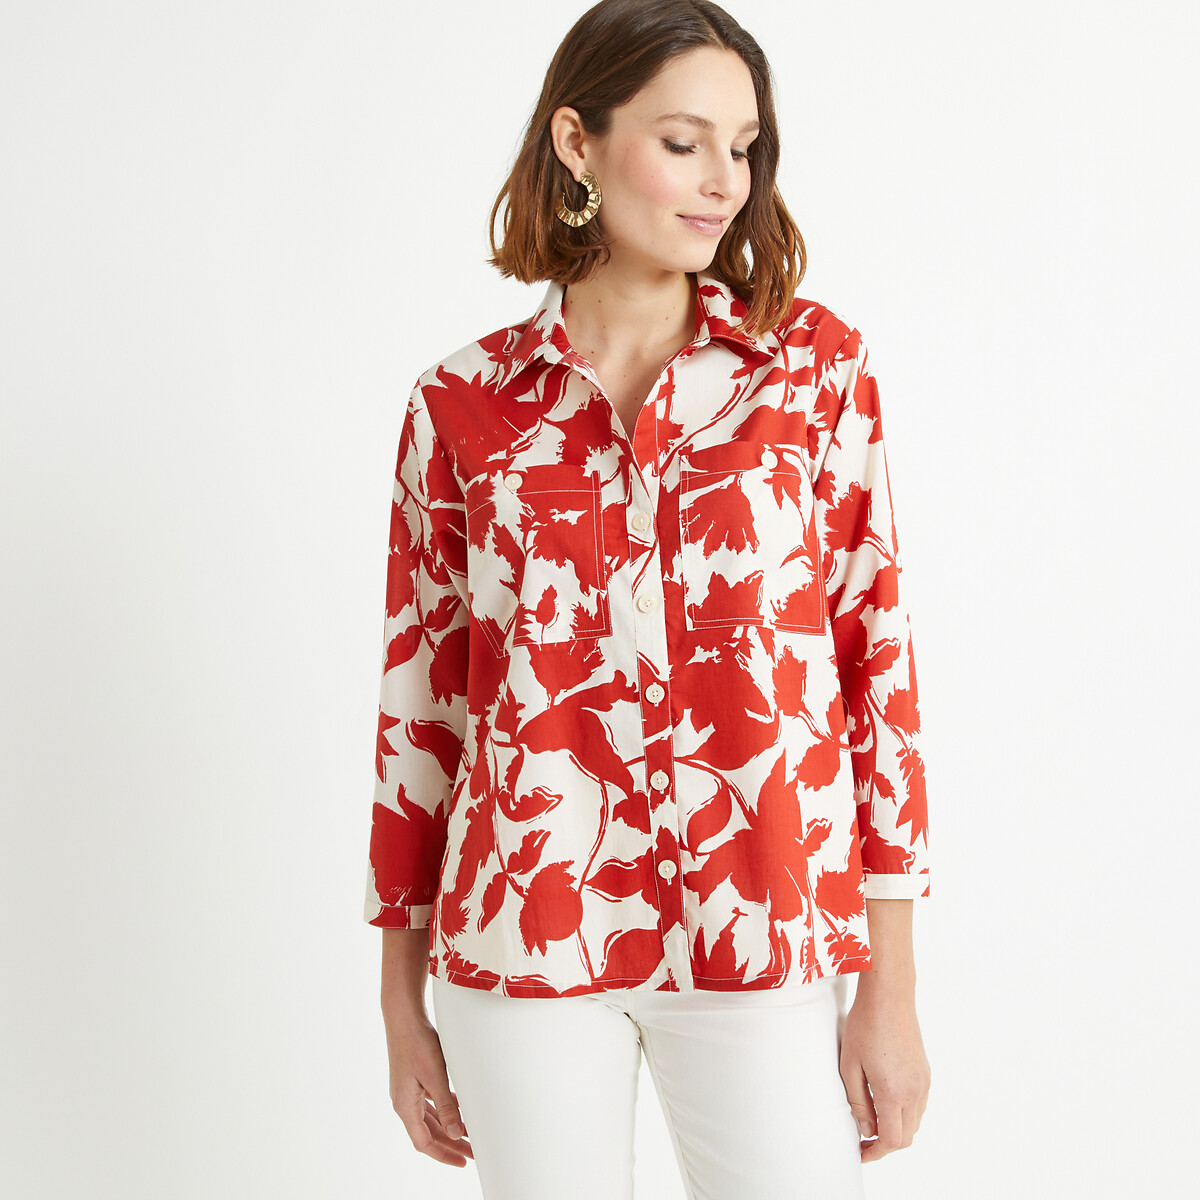 Floral Print Cotton Shirt with 3/4 Length Sleeves